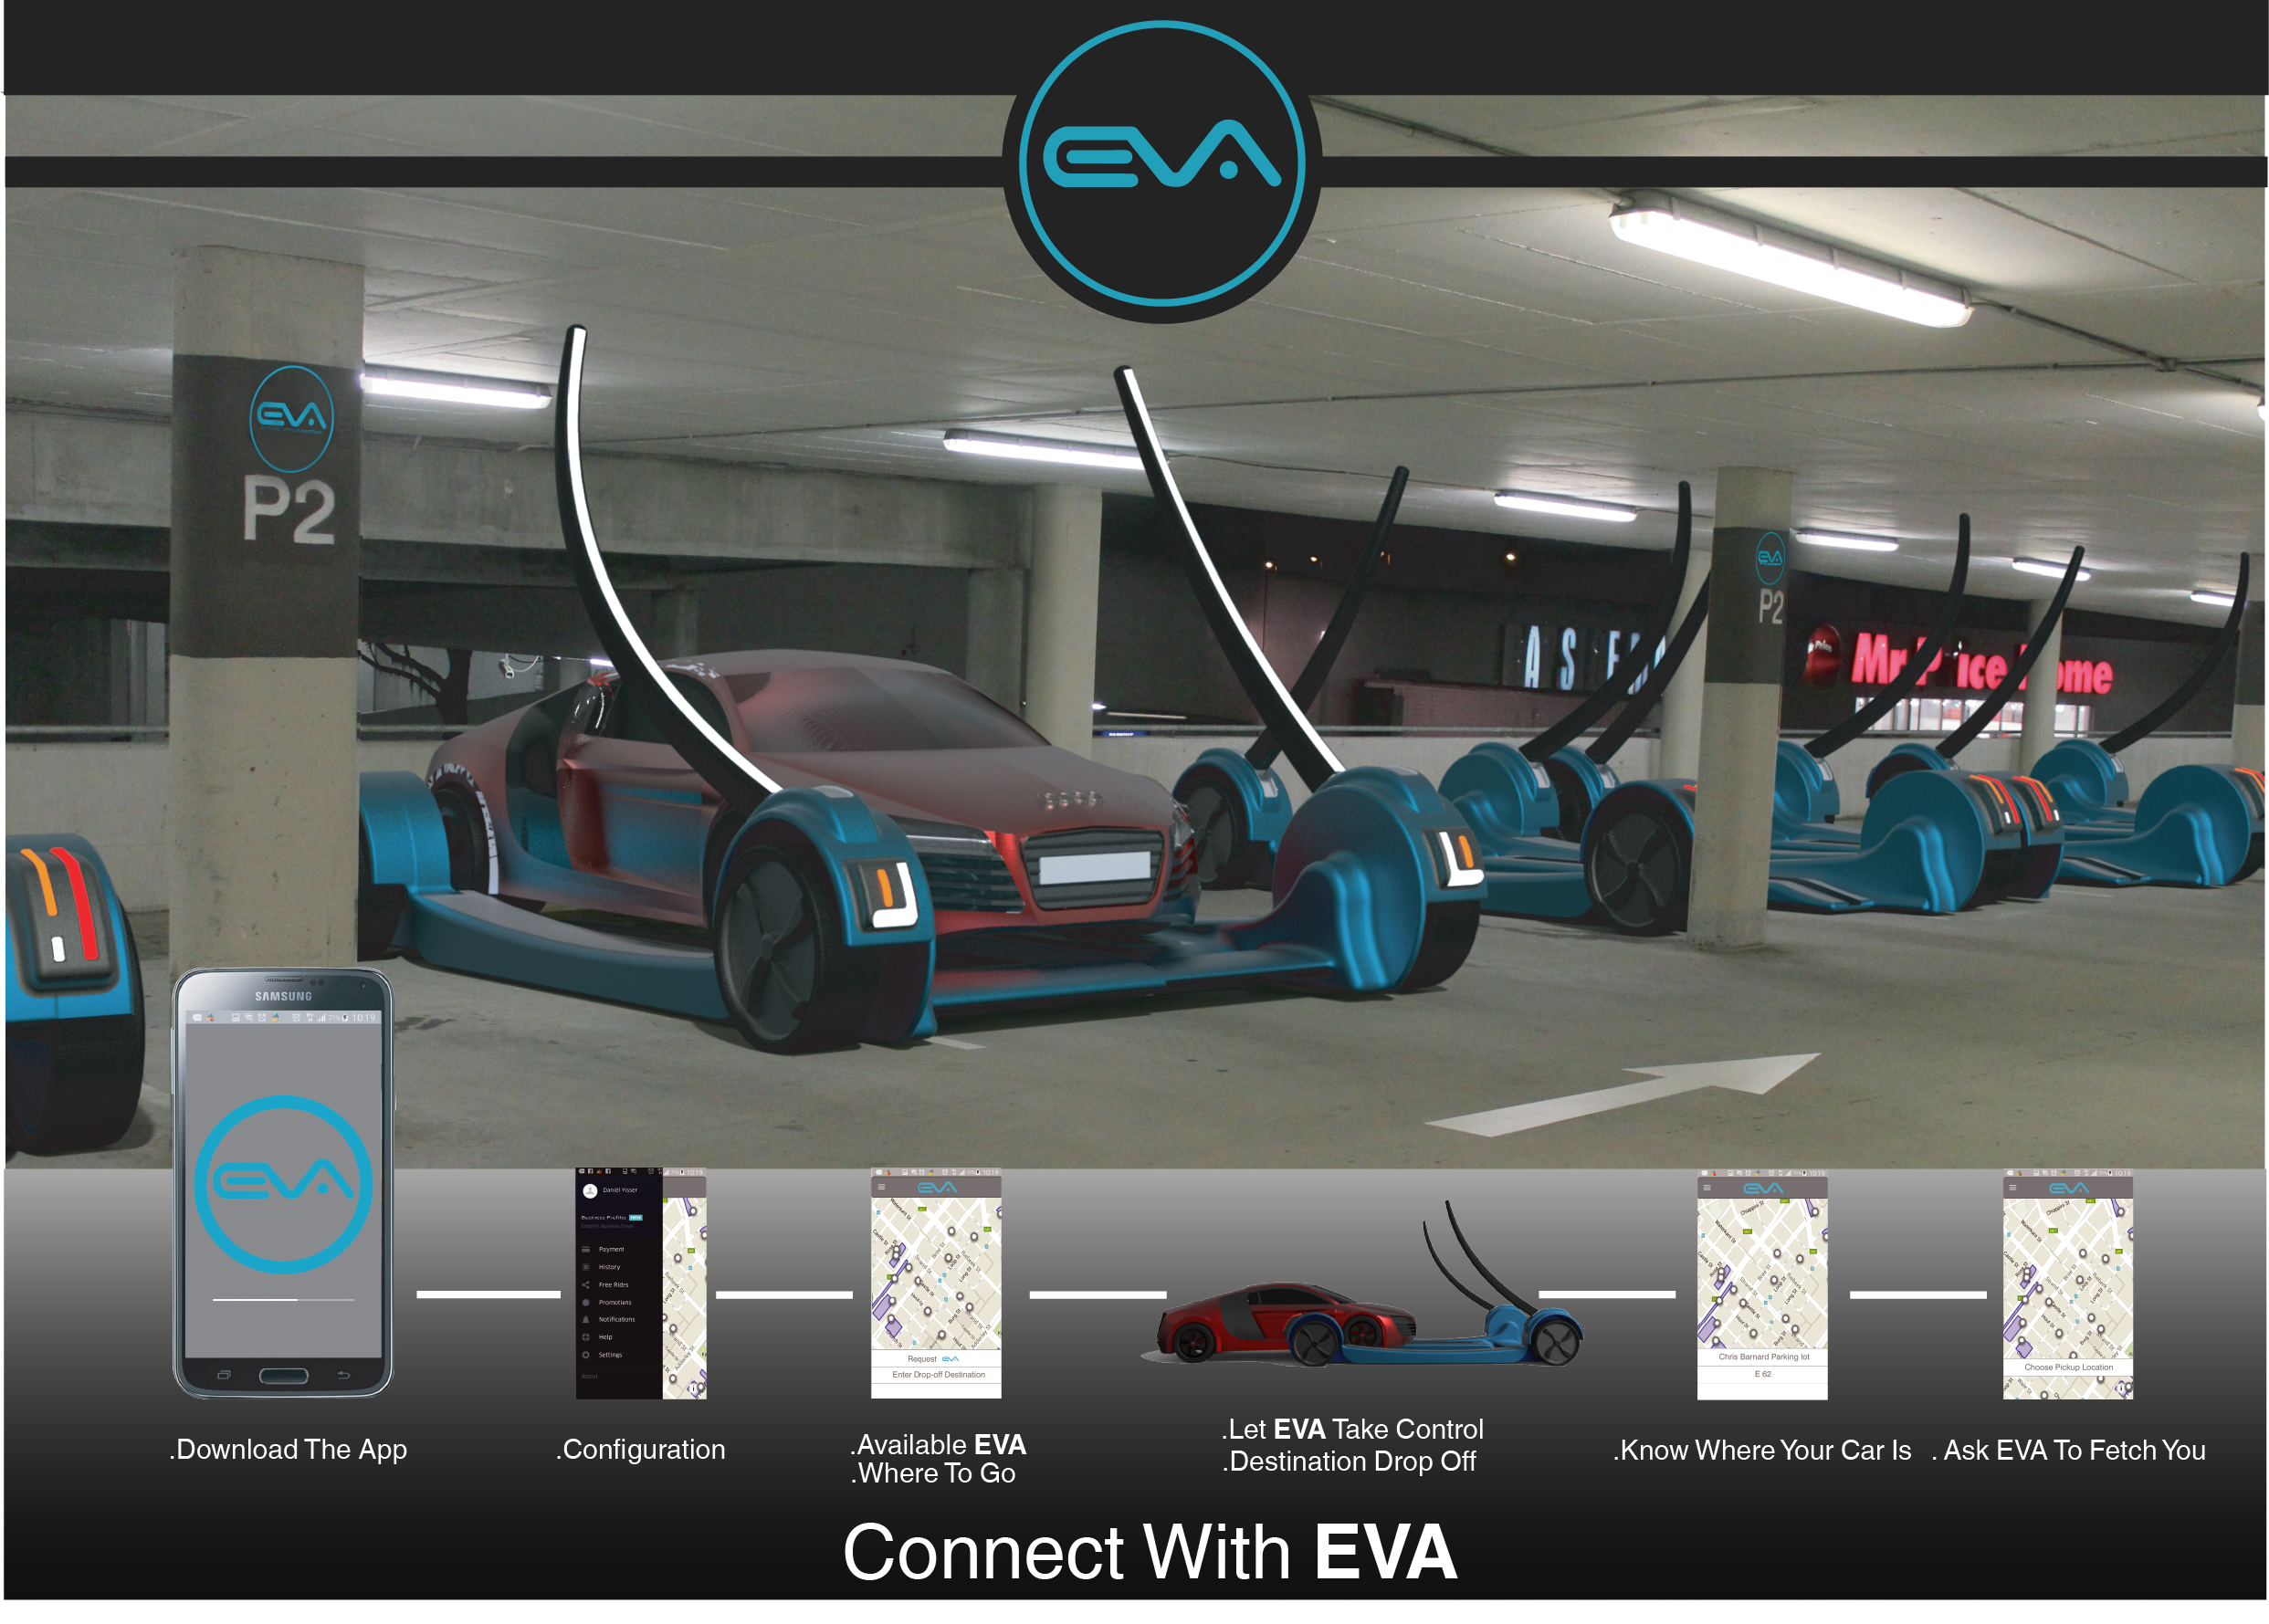 EVA (Electric Vehicle Assistant) by Adrian Design Records